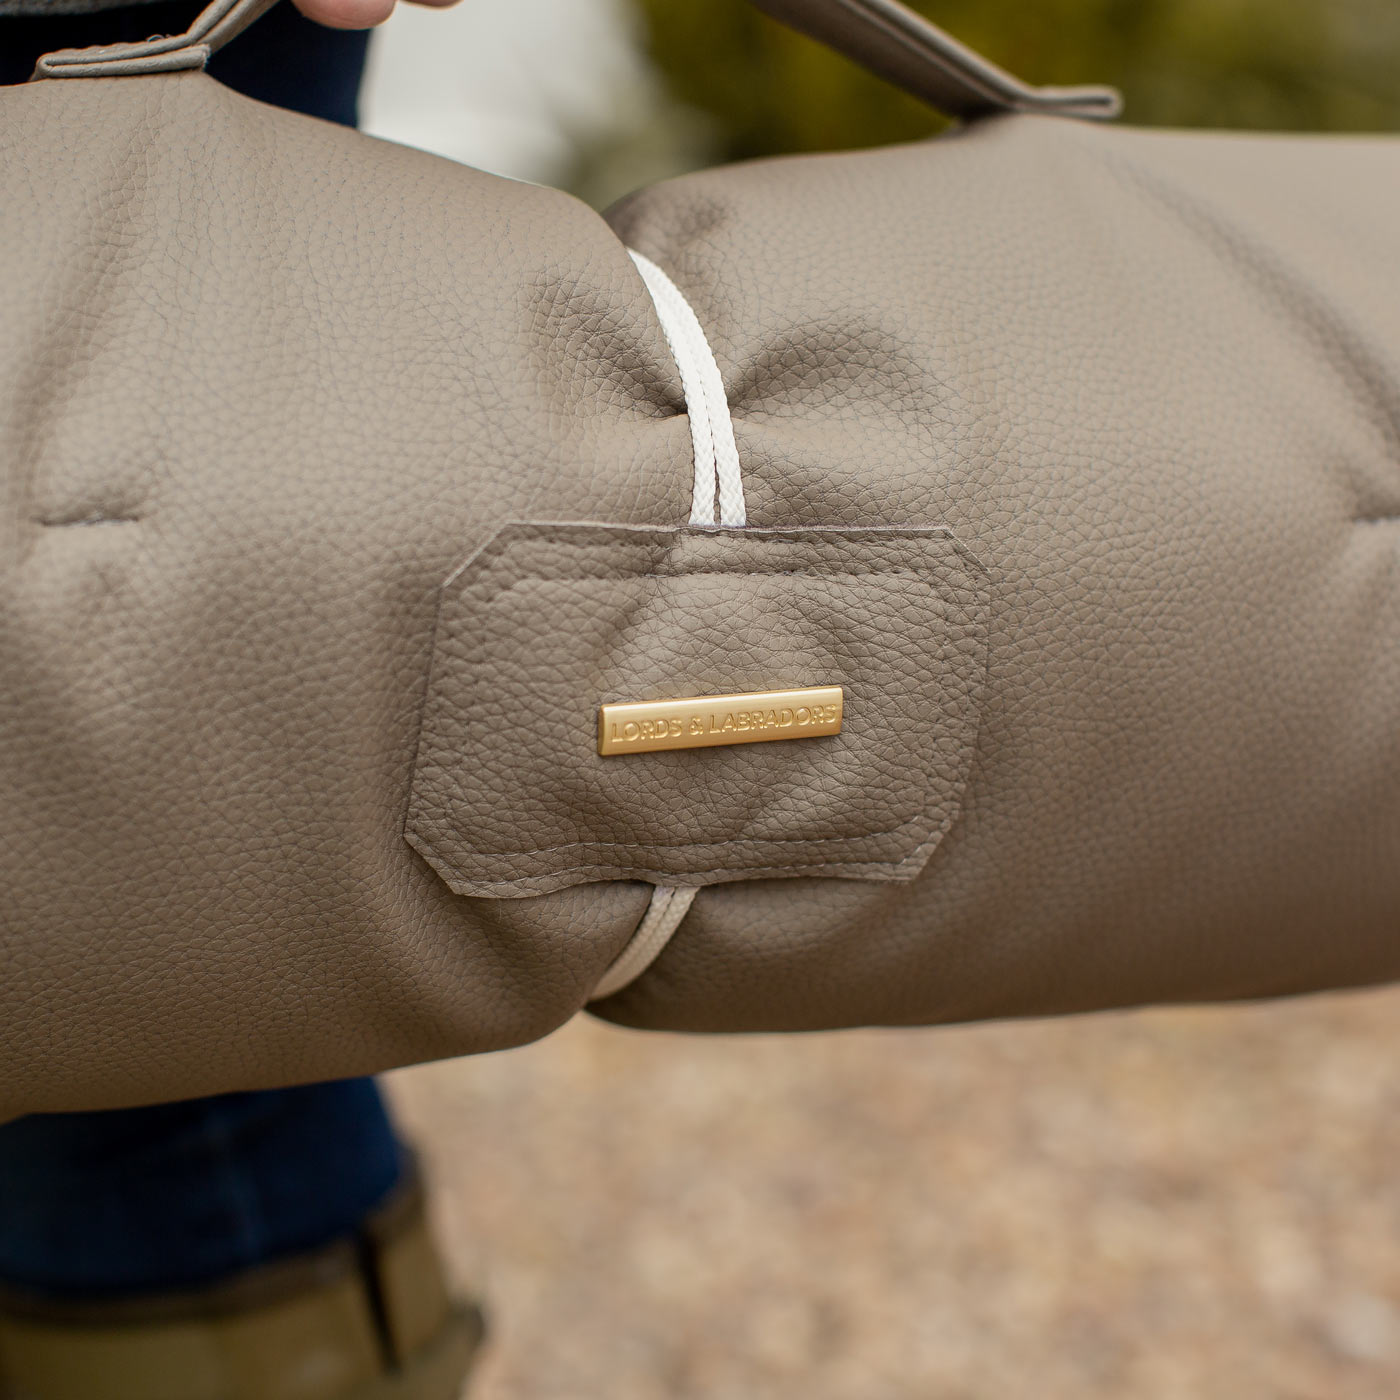 Embark on the perfect pet travel with our luxury Travel Mat in Rhino Camel. Featuring a Carry handle for on the move once Rolled up for easy storage, can be used as a seat cover, boot mat or travel bed! Available now at Lords & Labradors